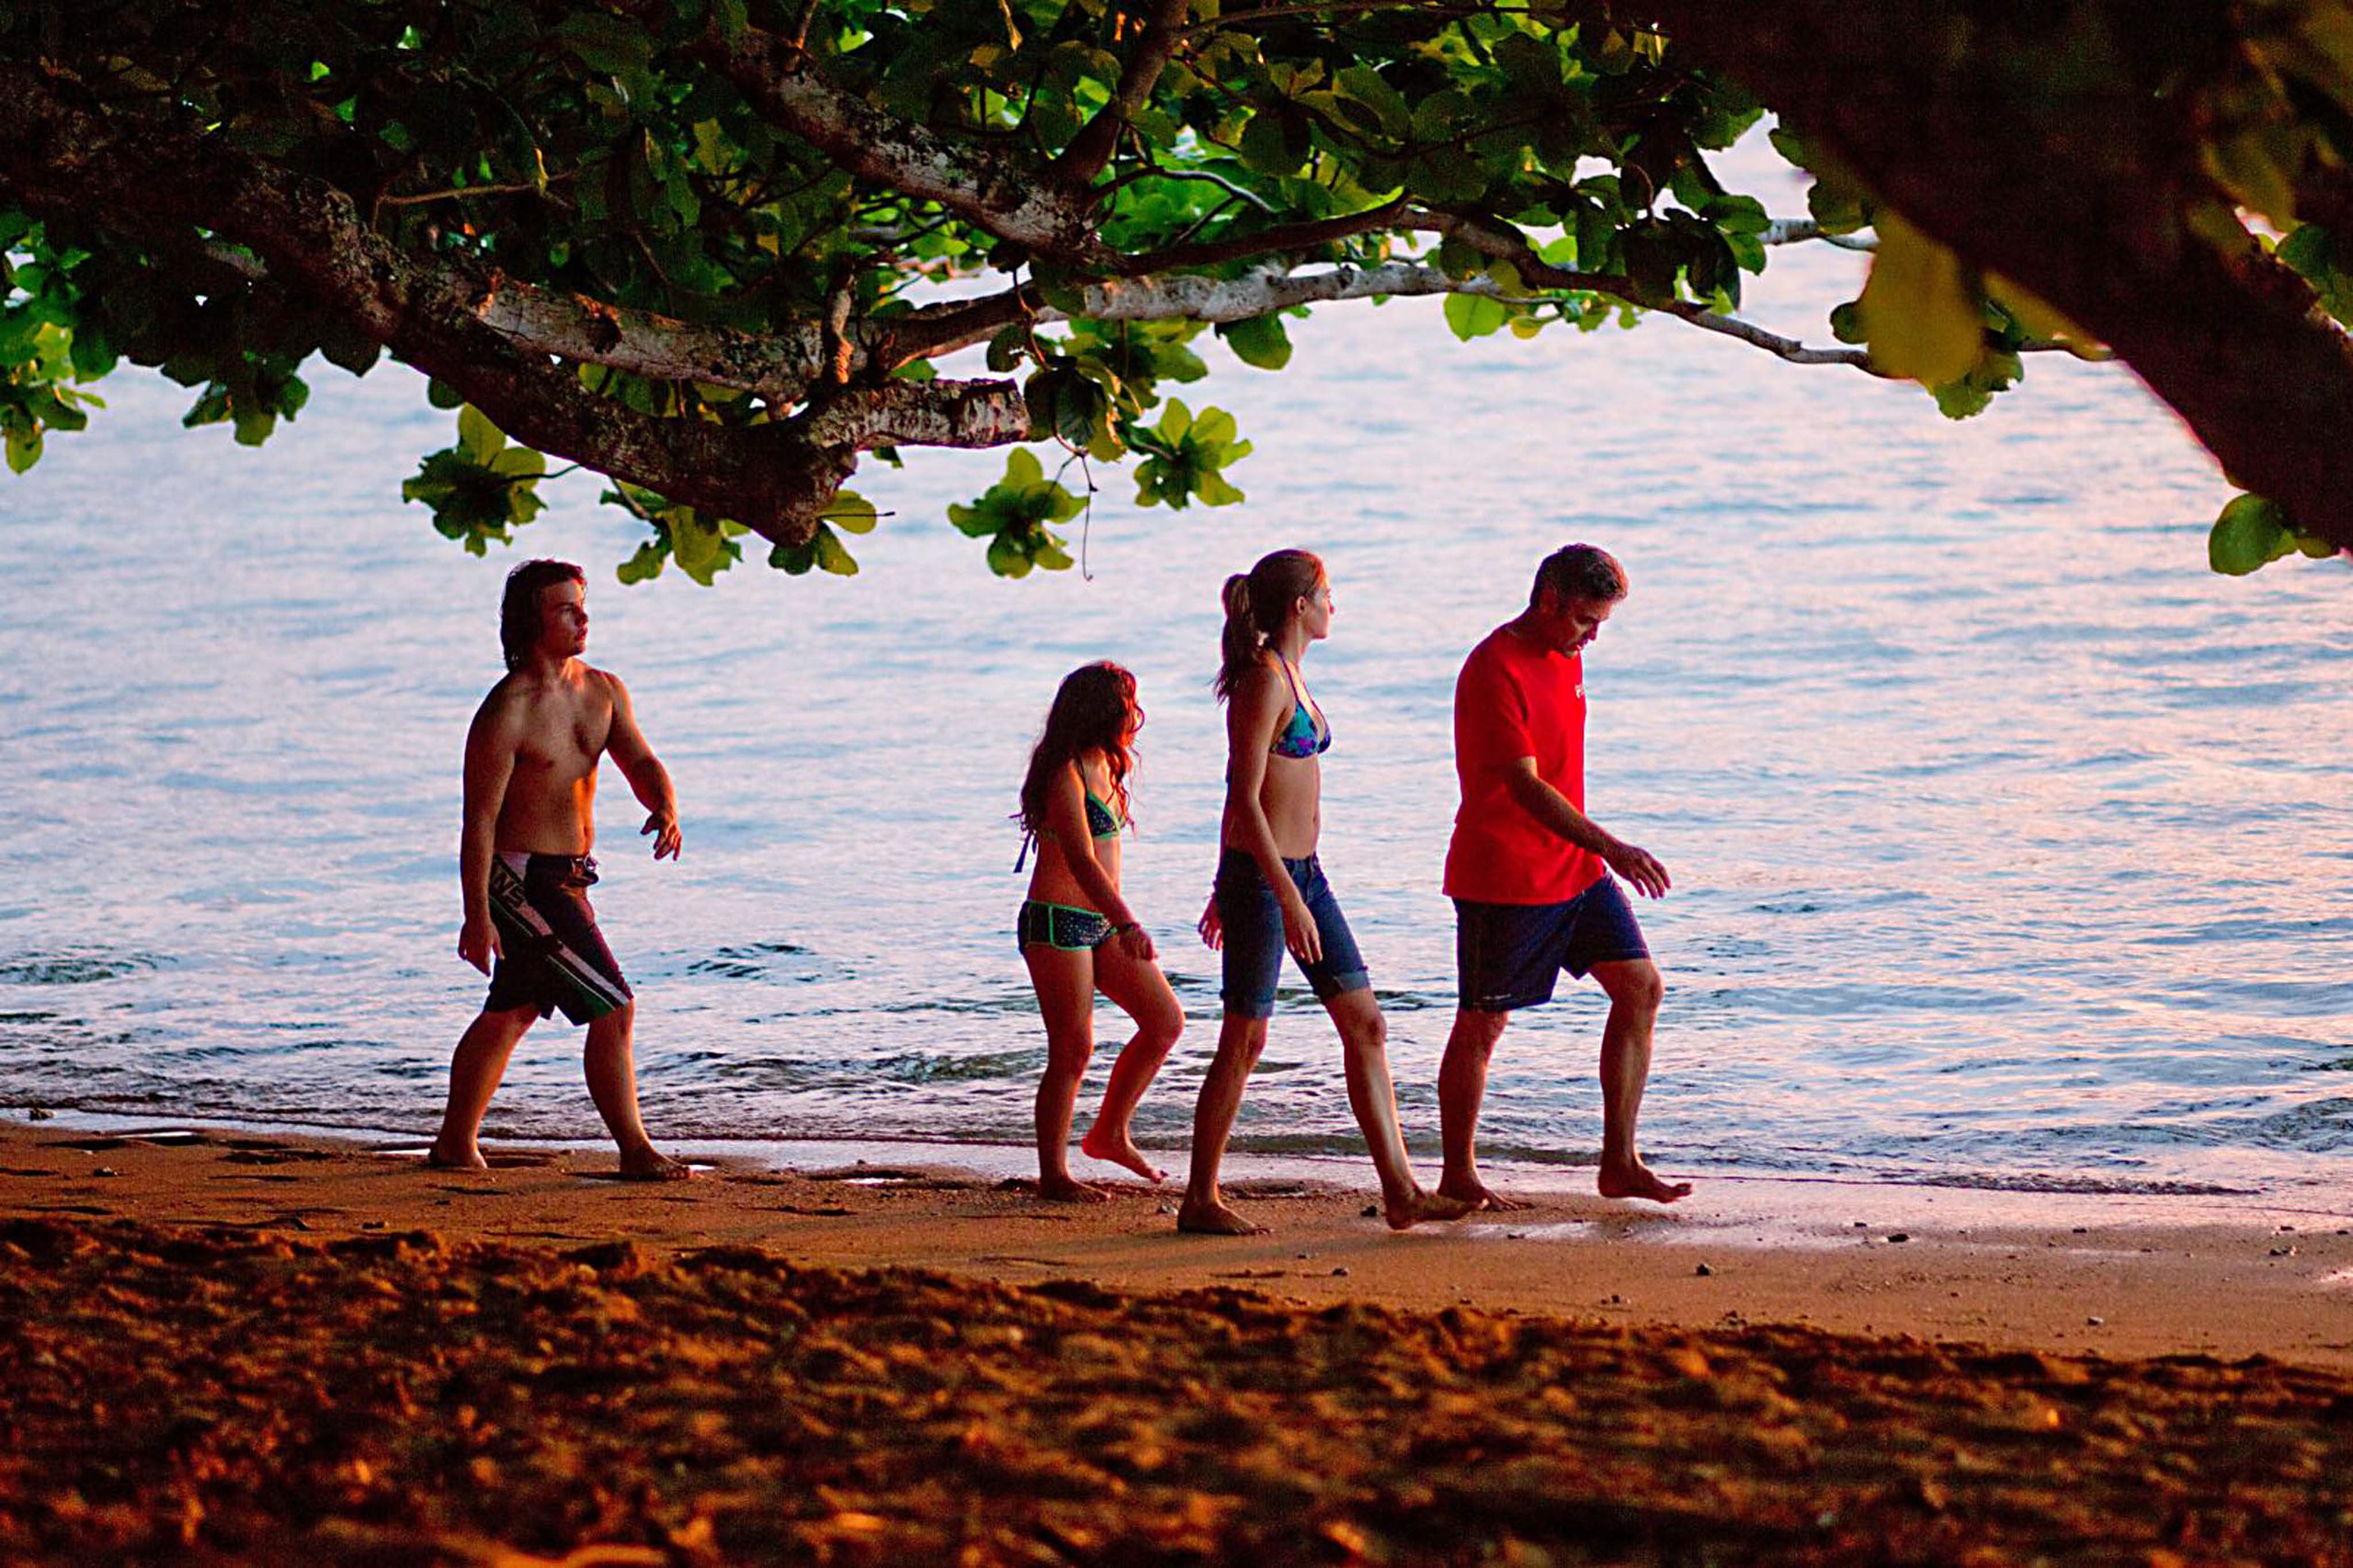 michael fassbender, The Descendants, Jessica Chastain, The Tree of Life